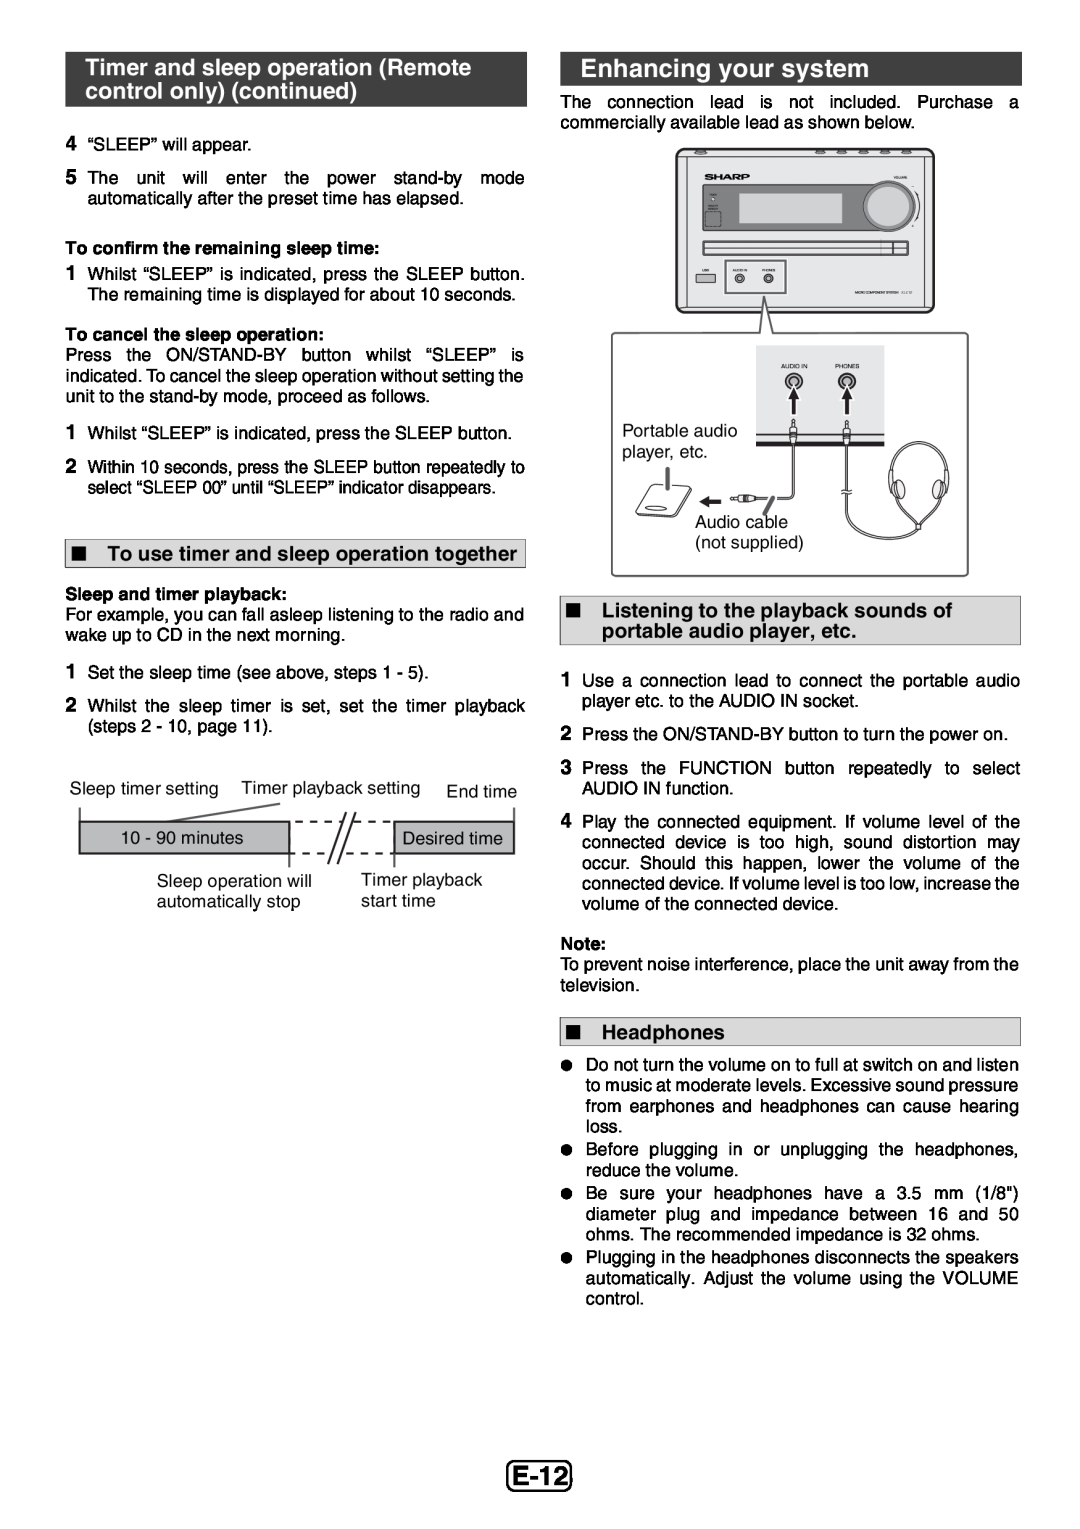 Sharp XL-E12H operation manual E-12, Enhancing your system, To use timer and sleep operation together, Headphones 